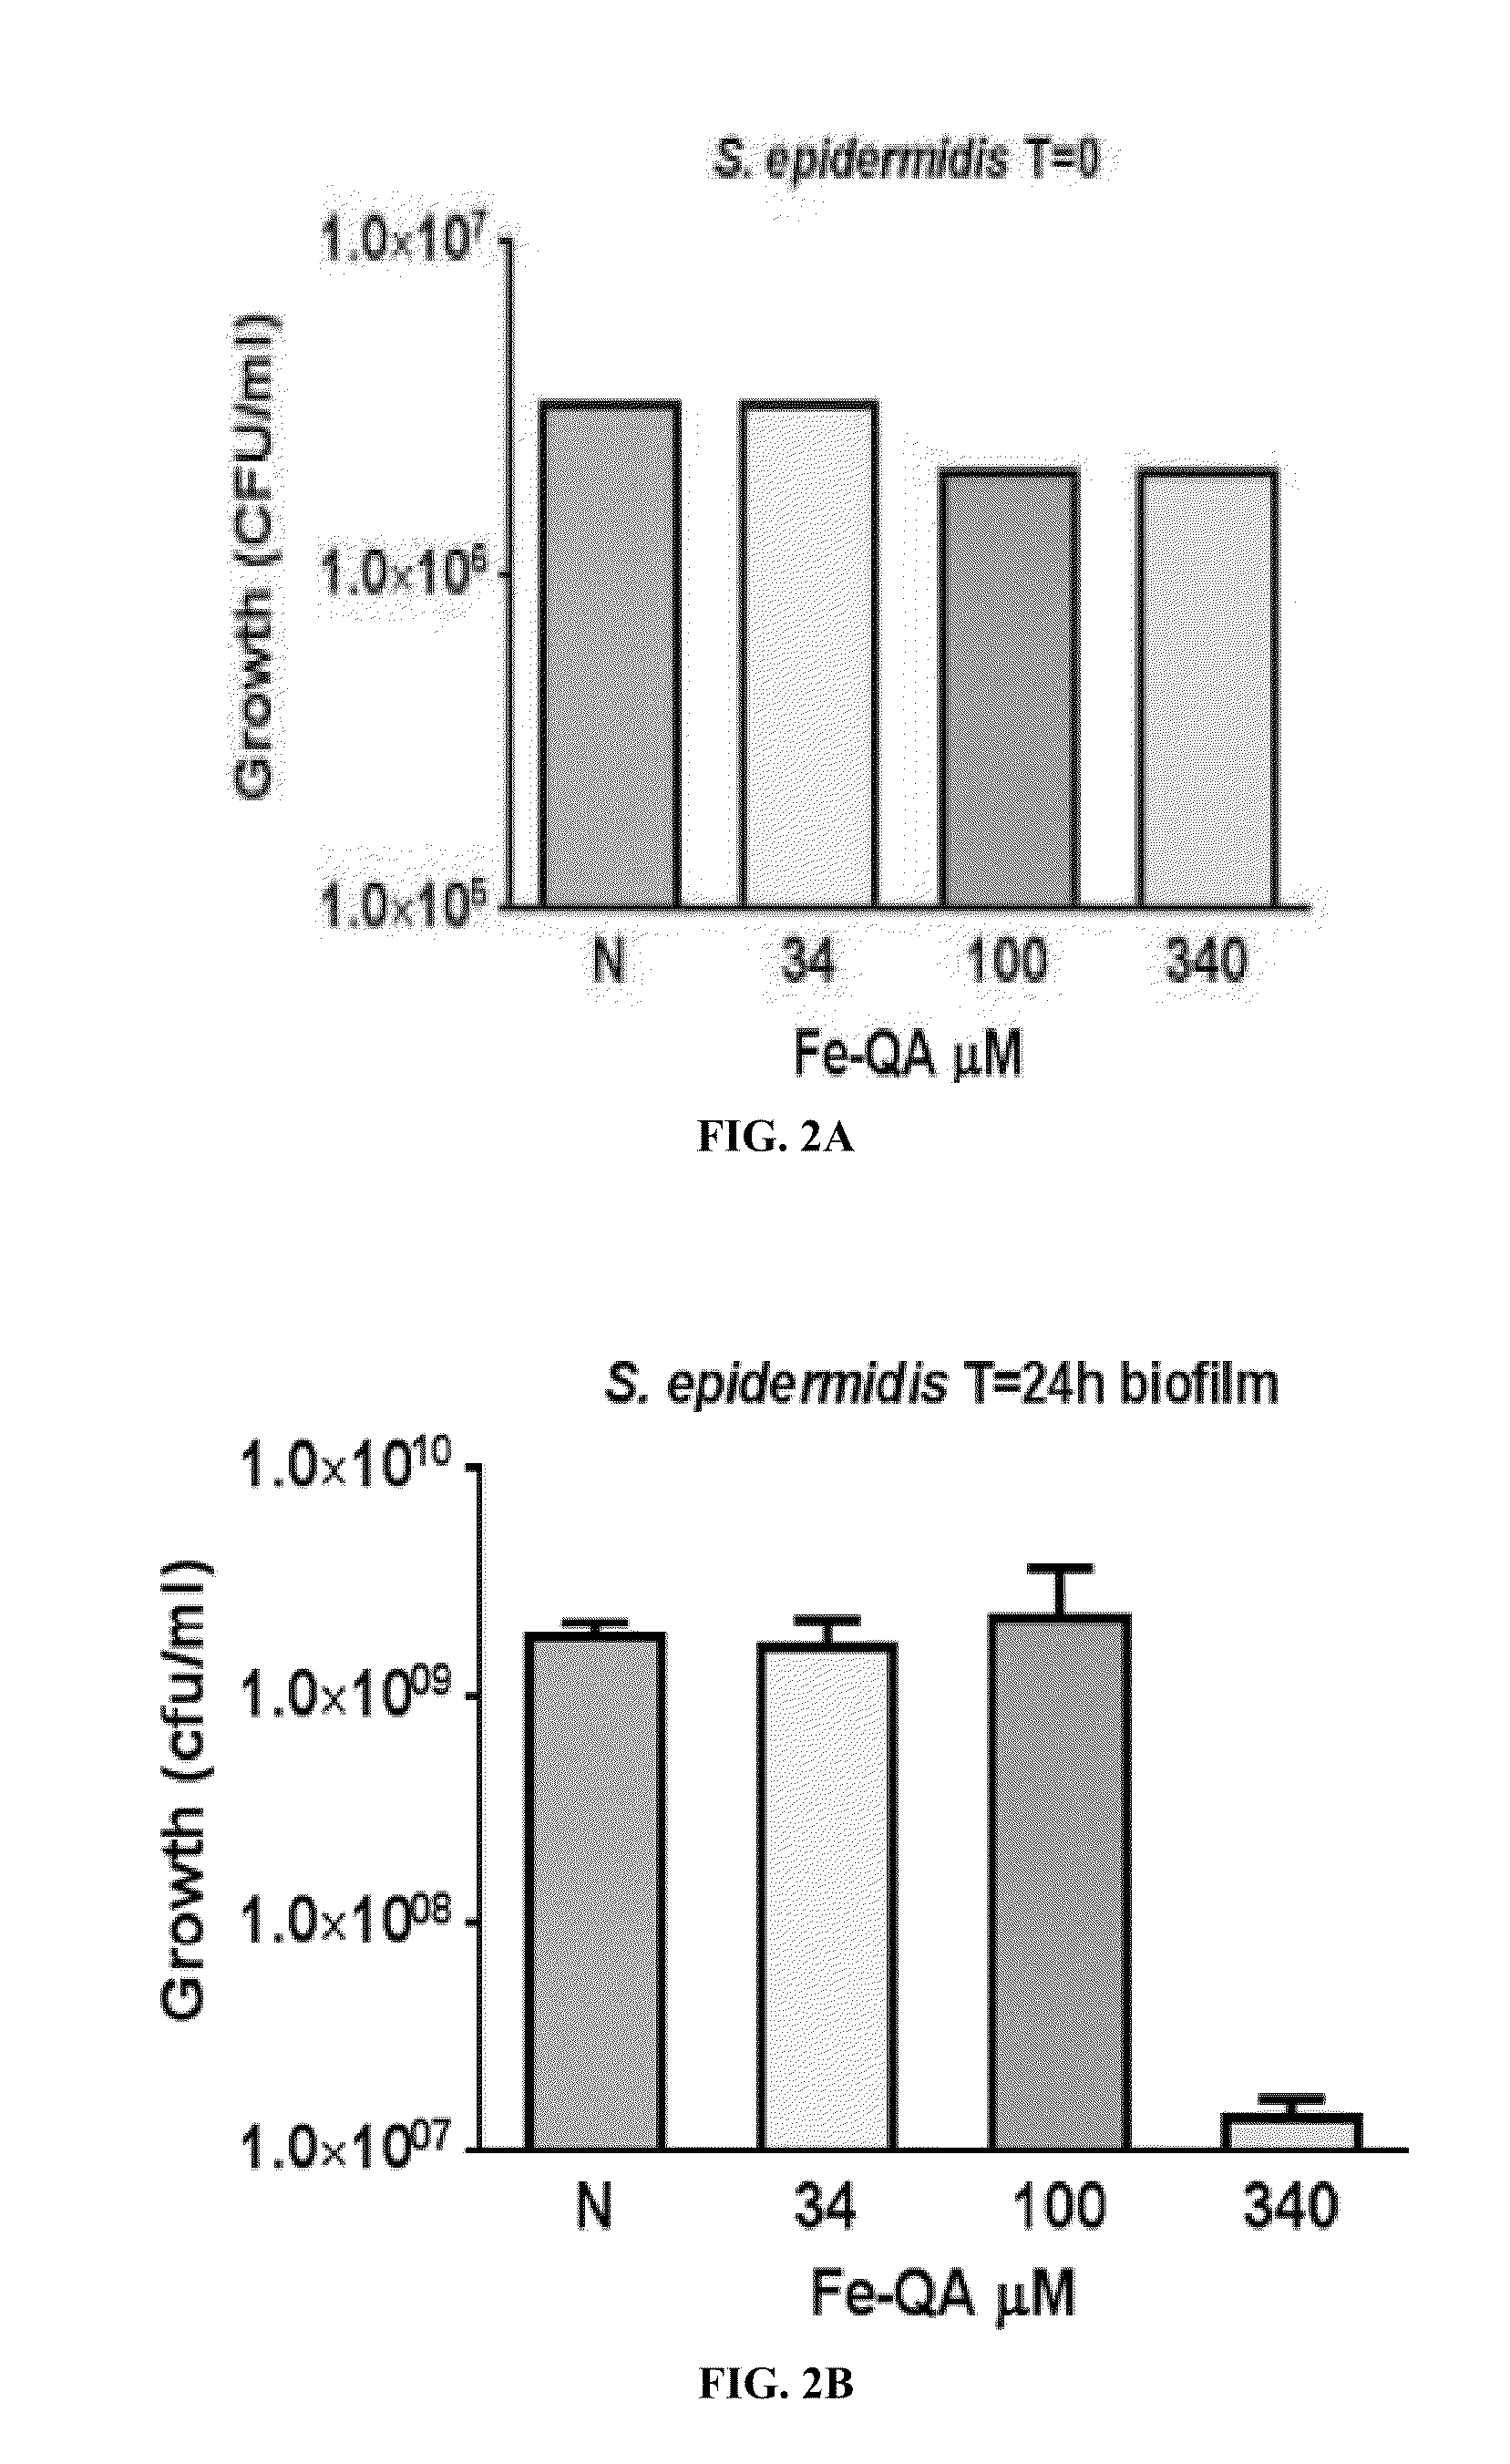 Antimicrobial compounds and compositions, and uses thereof